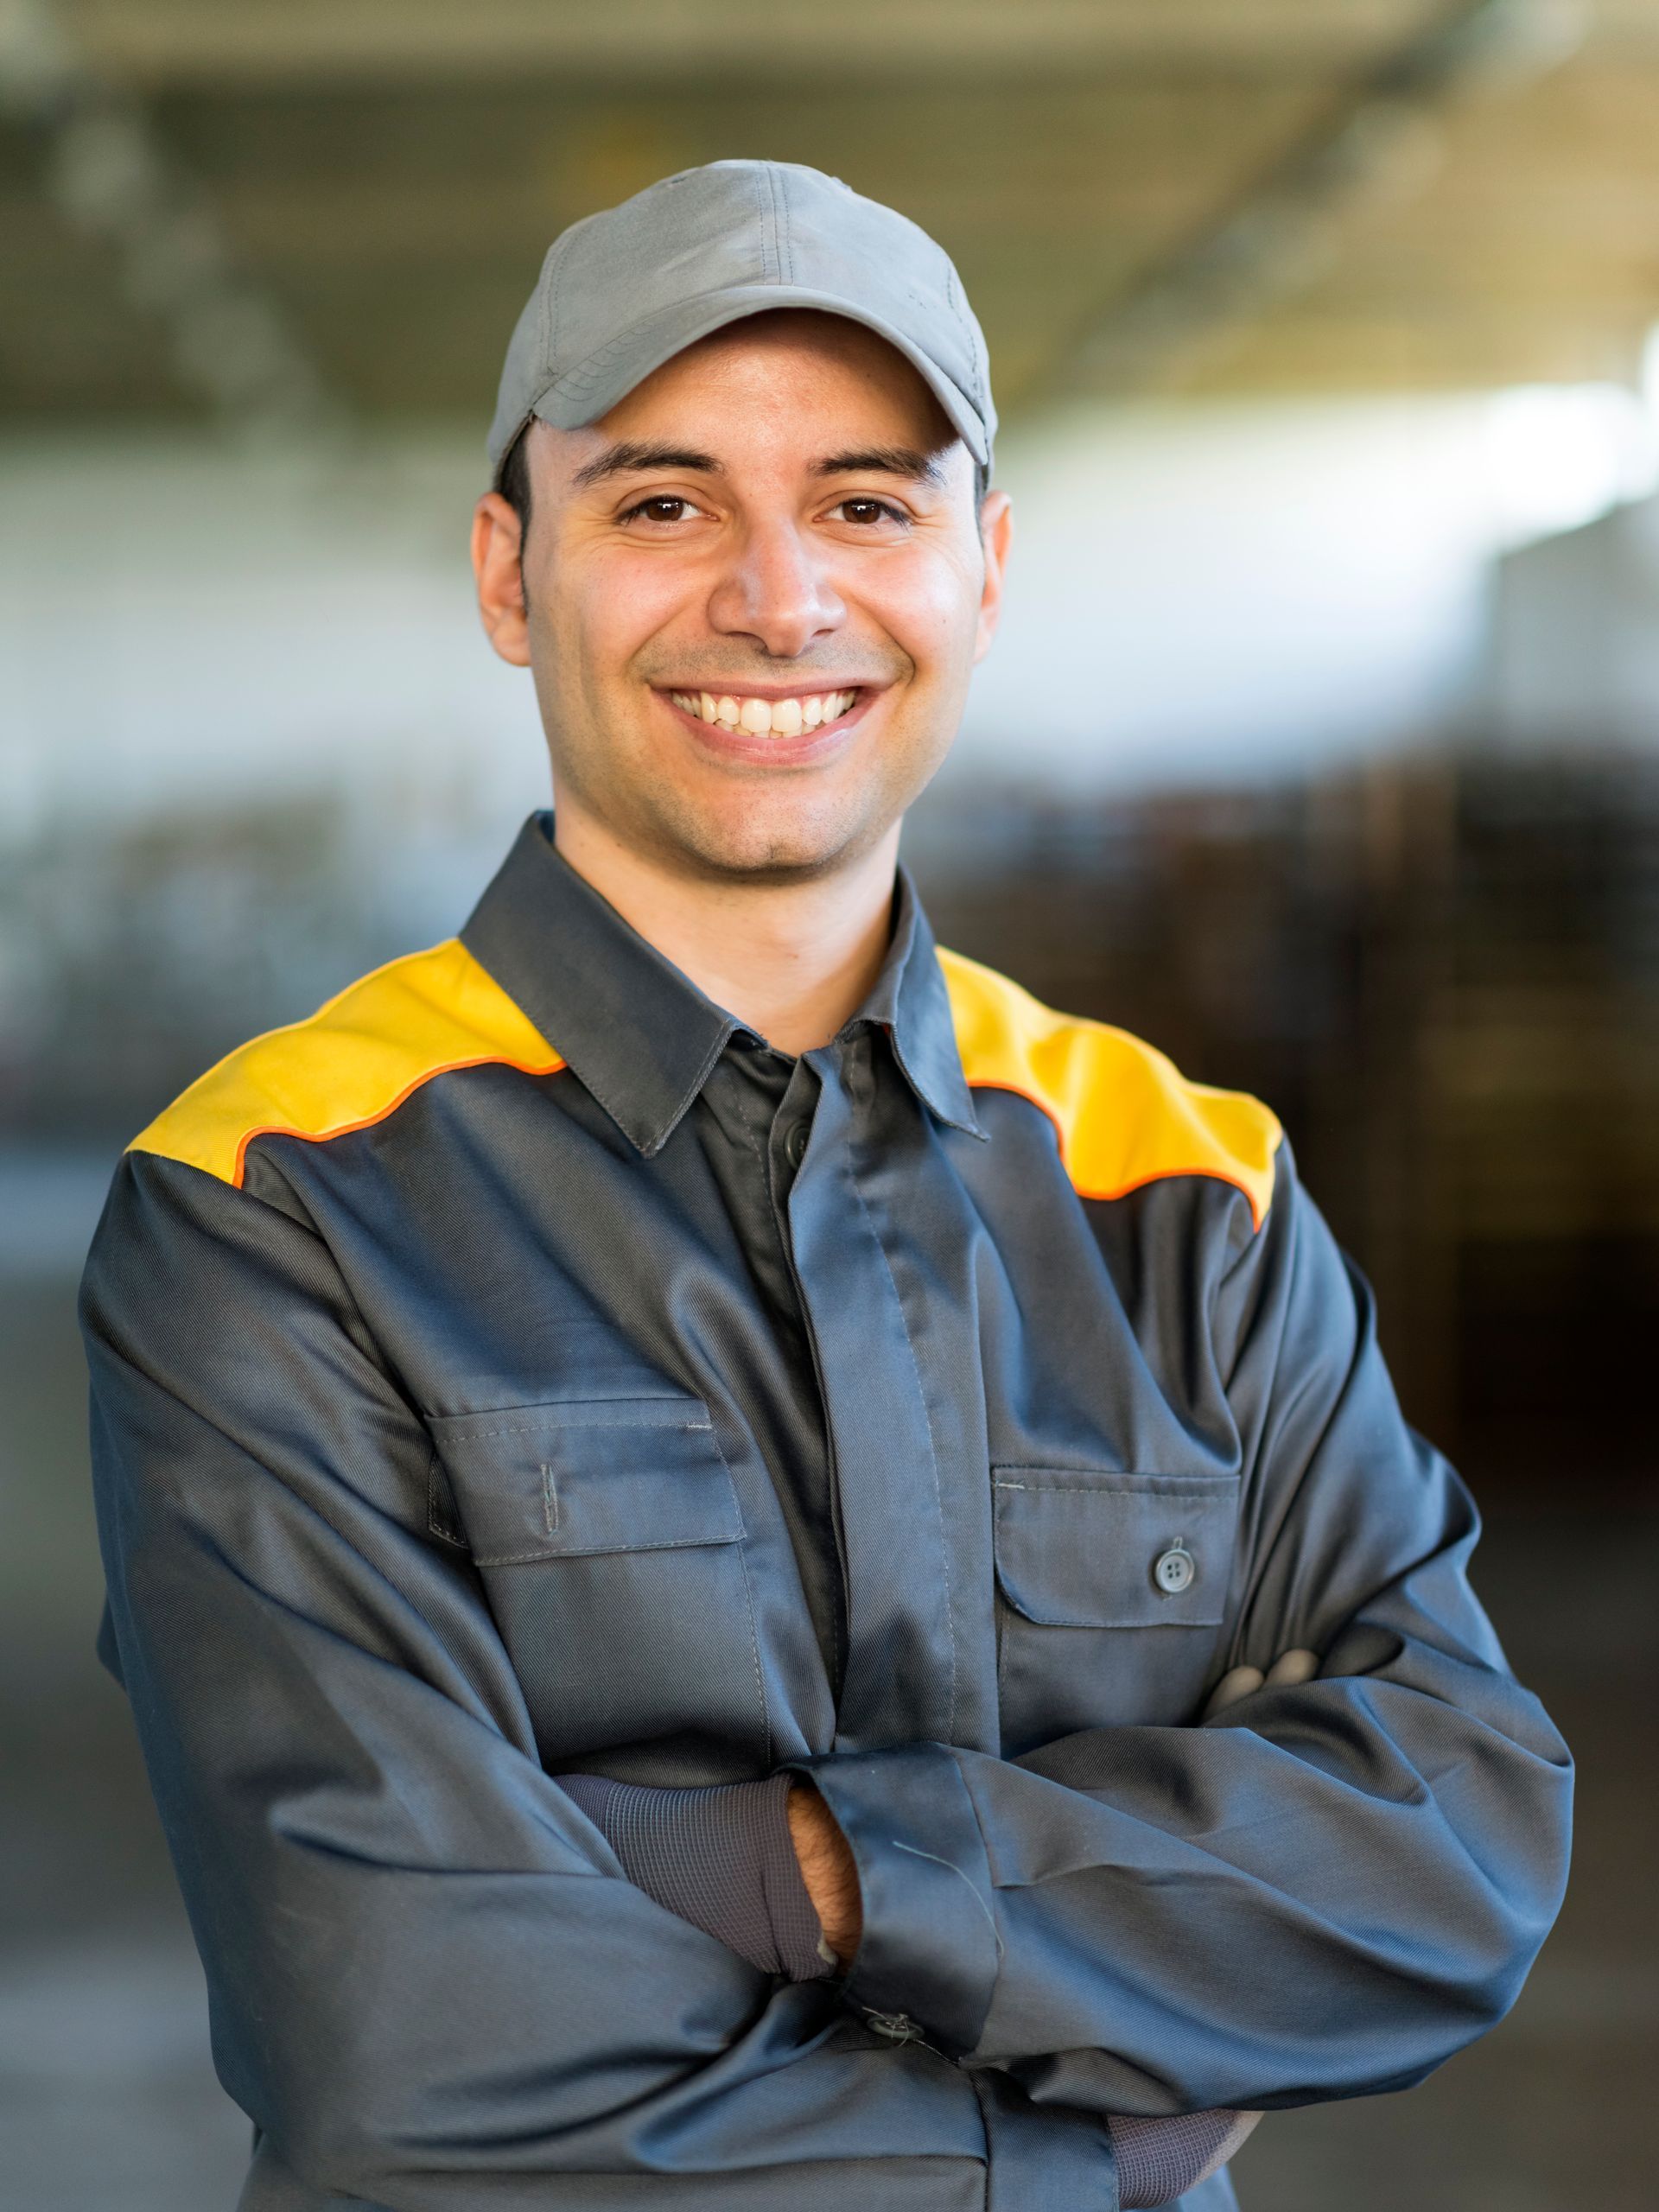 a man wearing a hat and overalls is smiling with his arms crossed .